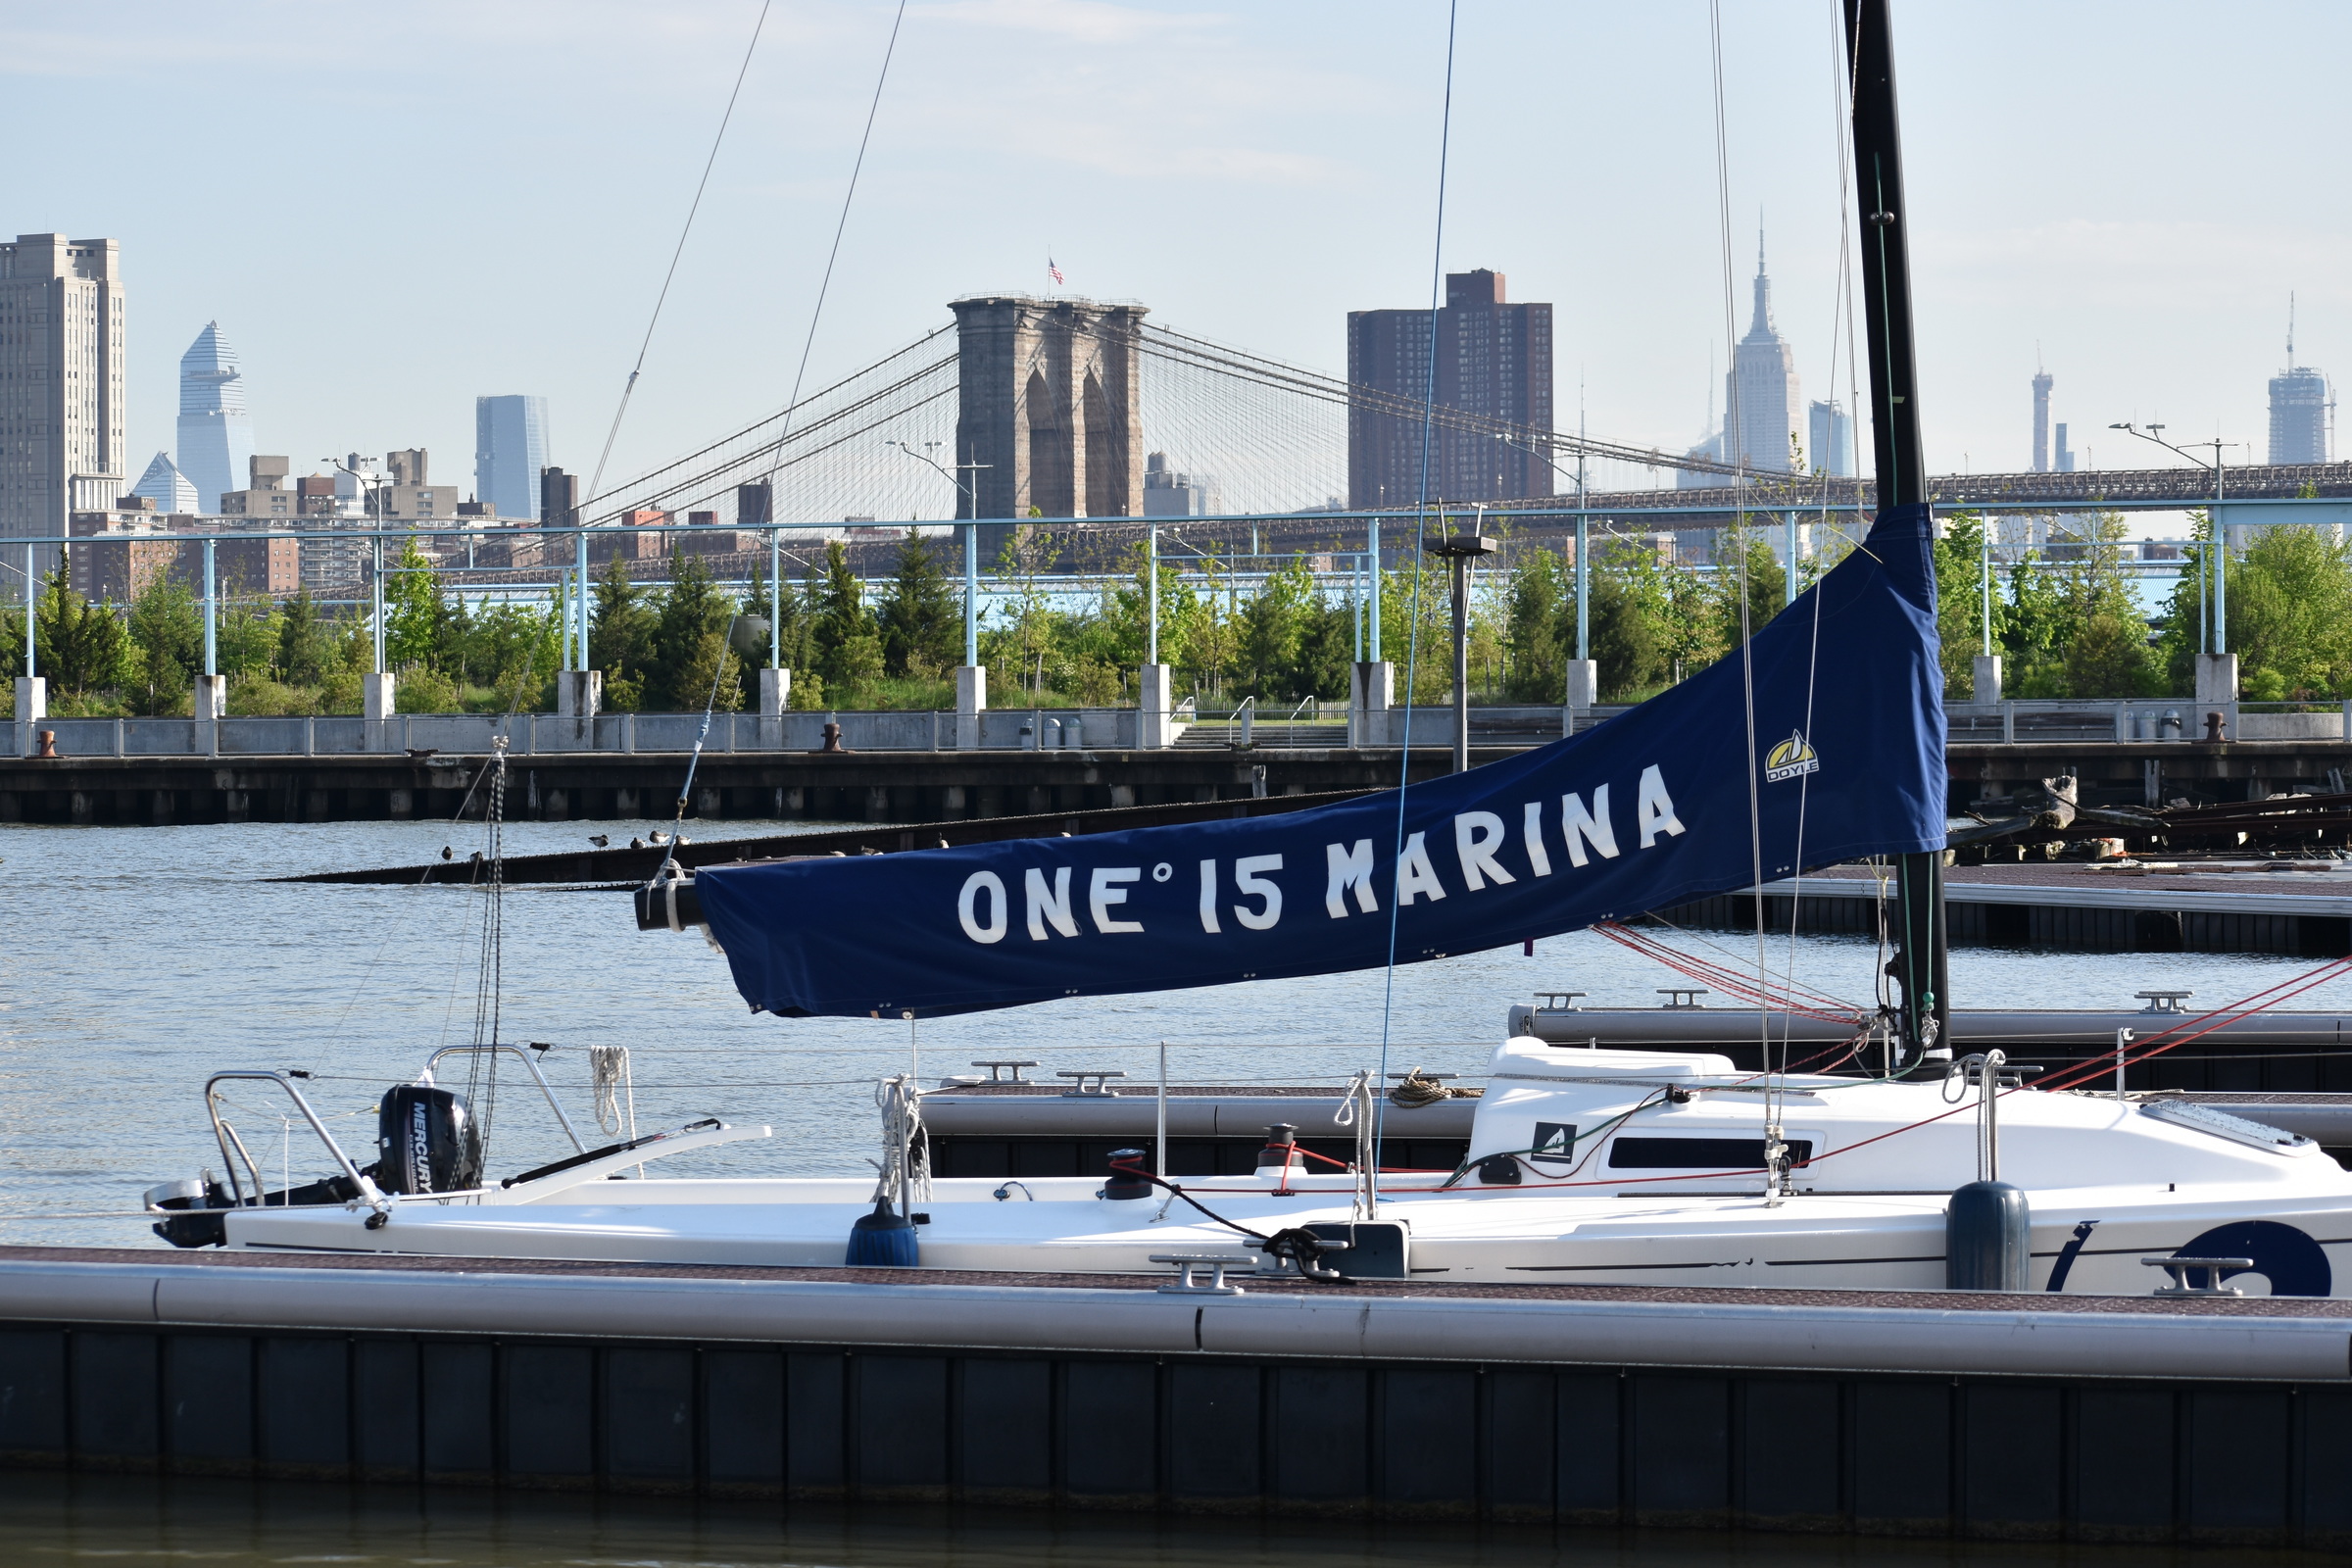 ONE15 Brooklyn Marina, on the shores of Brooklyn Heights, is renting individual boat slips for the upcoming holiday (four-night minimum stay).